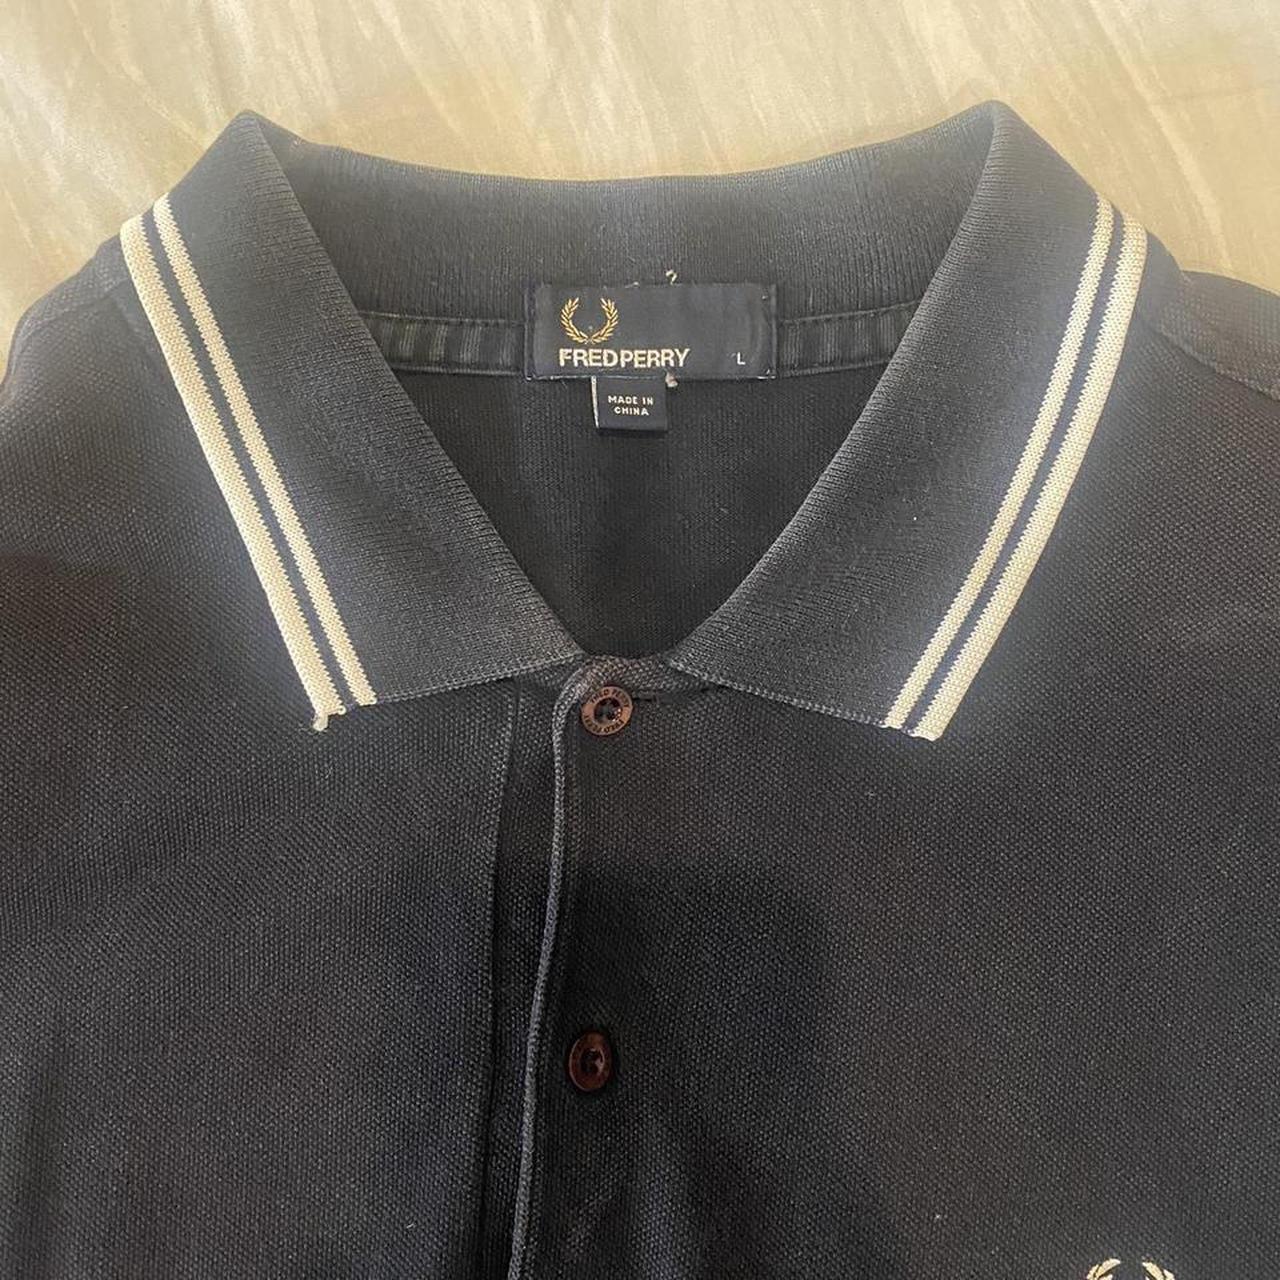 Fred Perry Men's Black and White Polo-shirts (4)